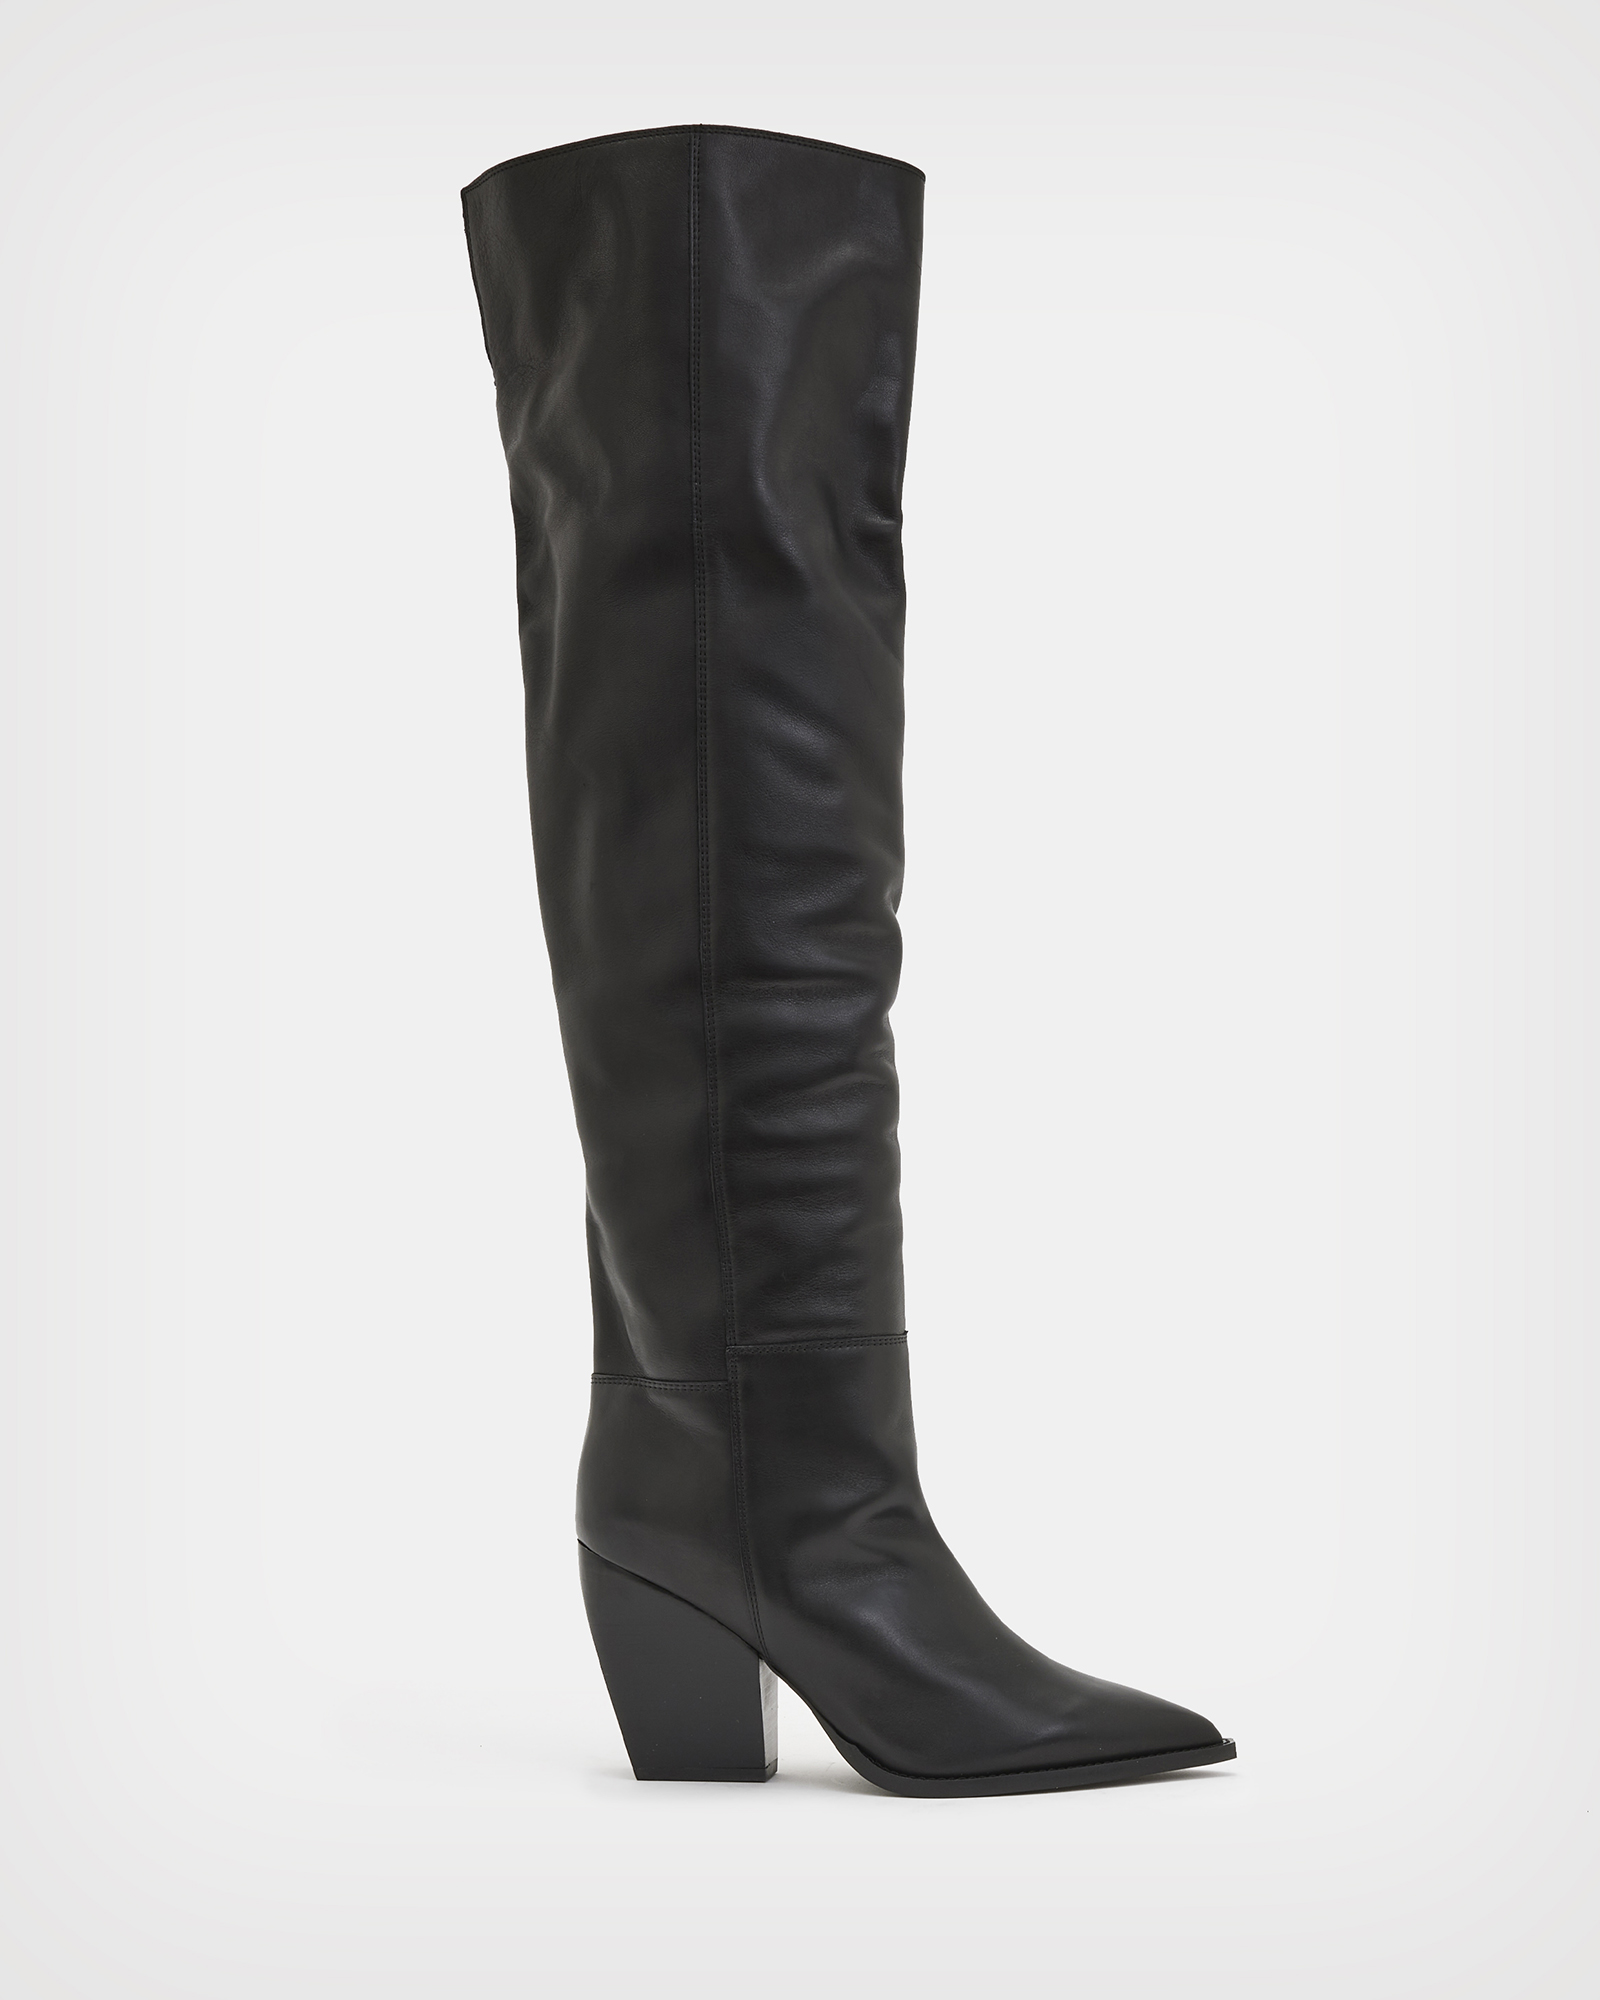 AllSaints Reina Knee High Leather Boots